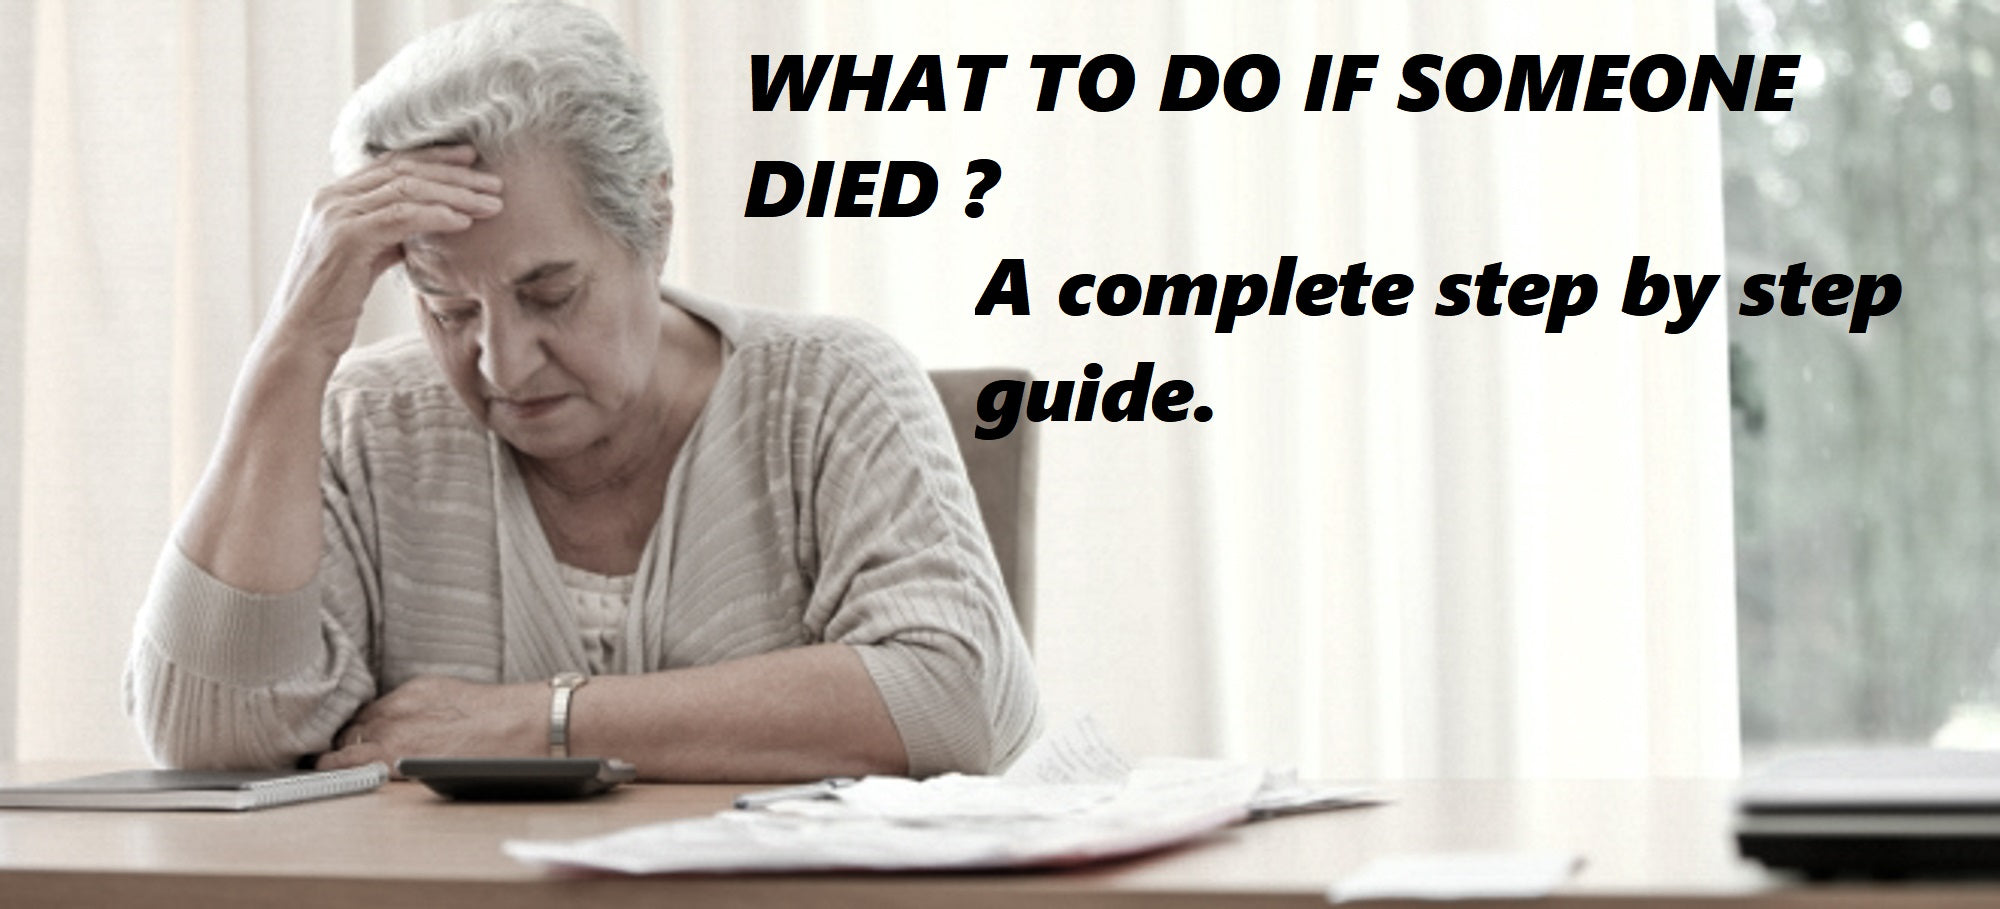 A complete step by step guide, what to do if someone died.